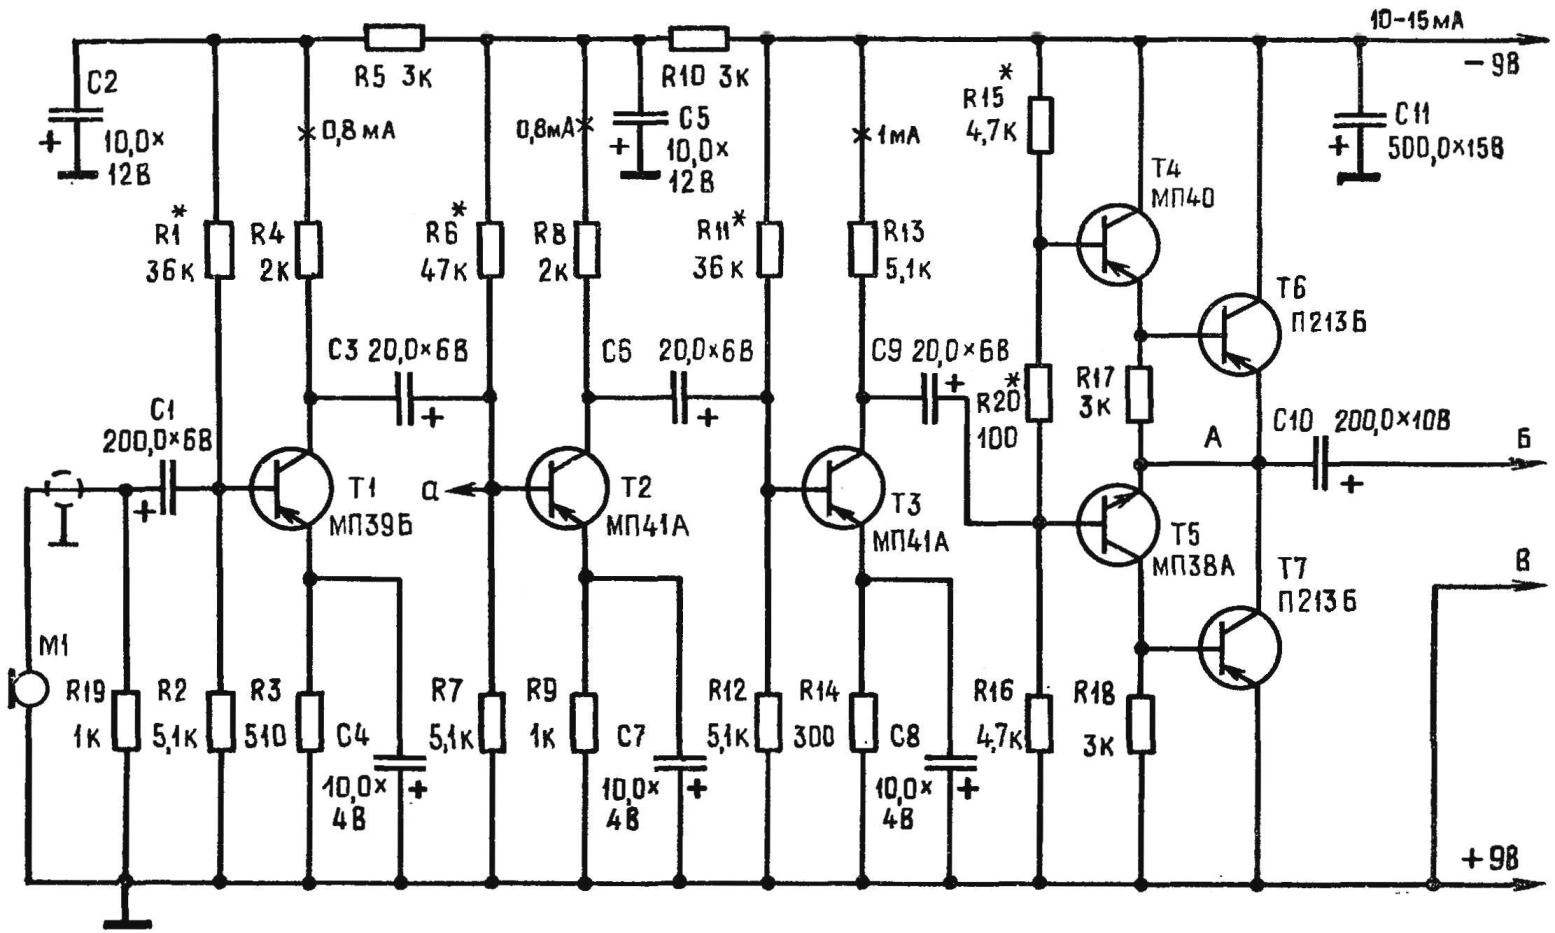 Fig. 2. Schematic diagram of the amplifier of an intercom.